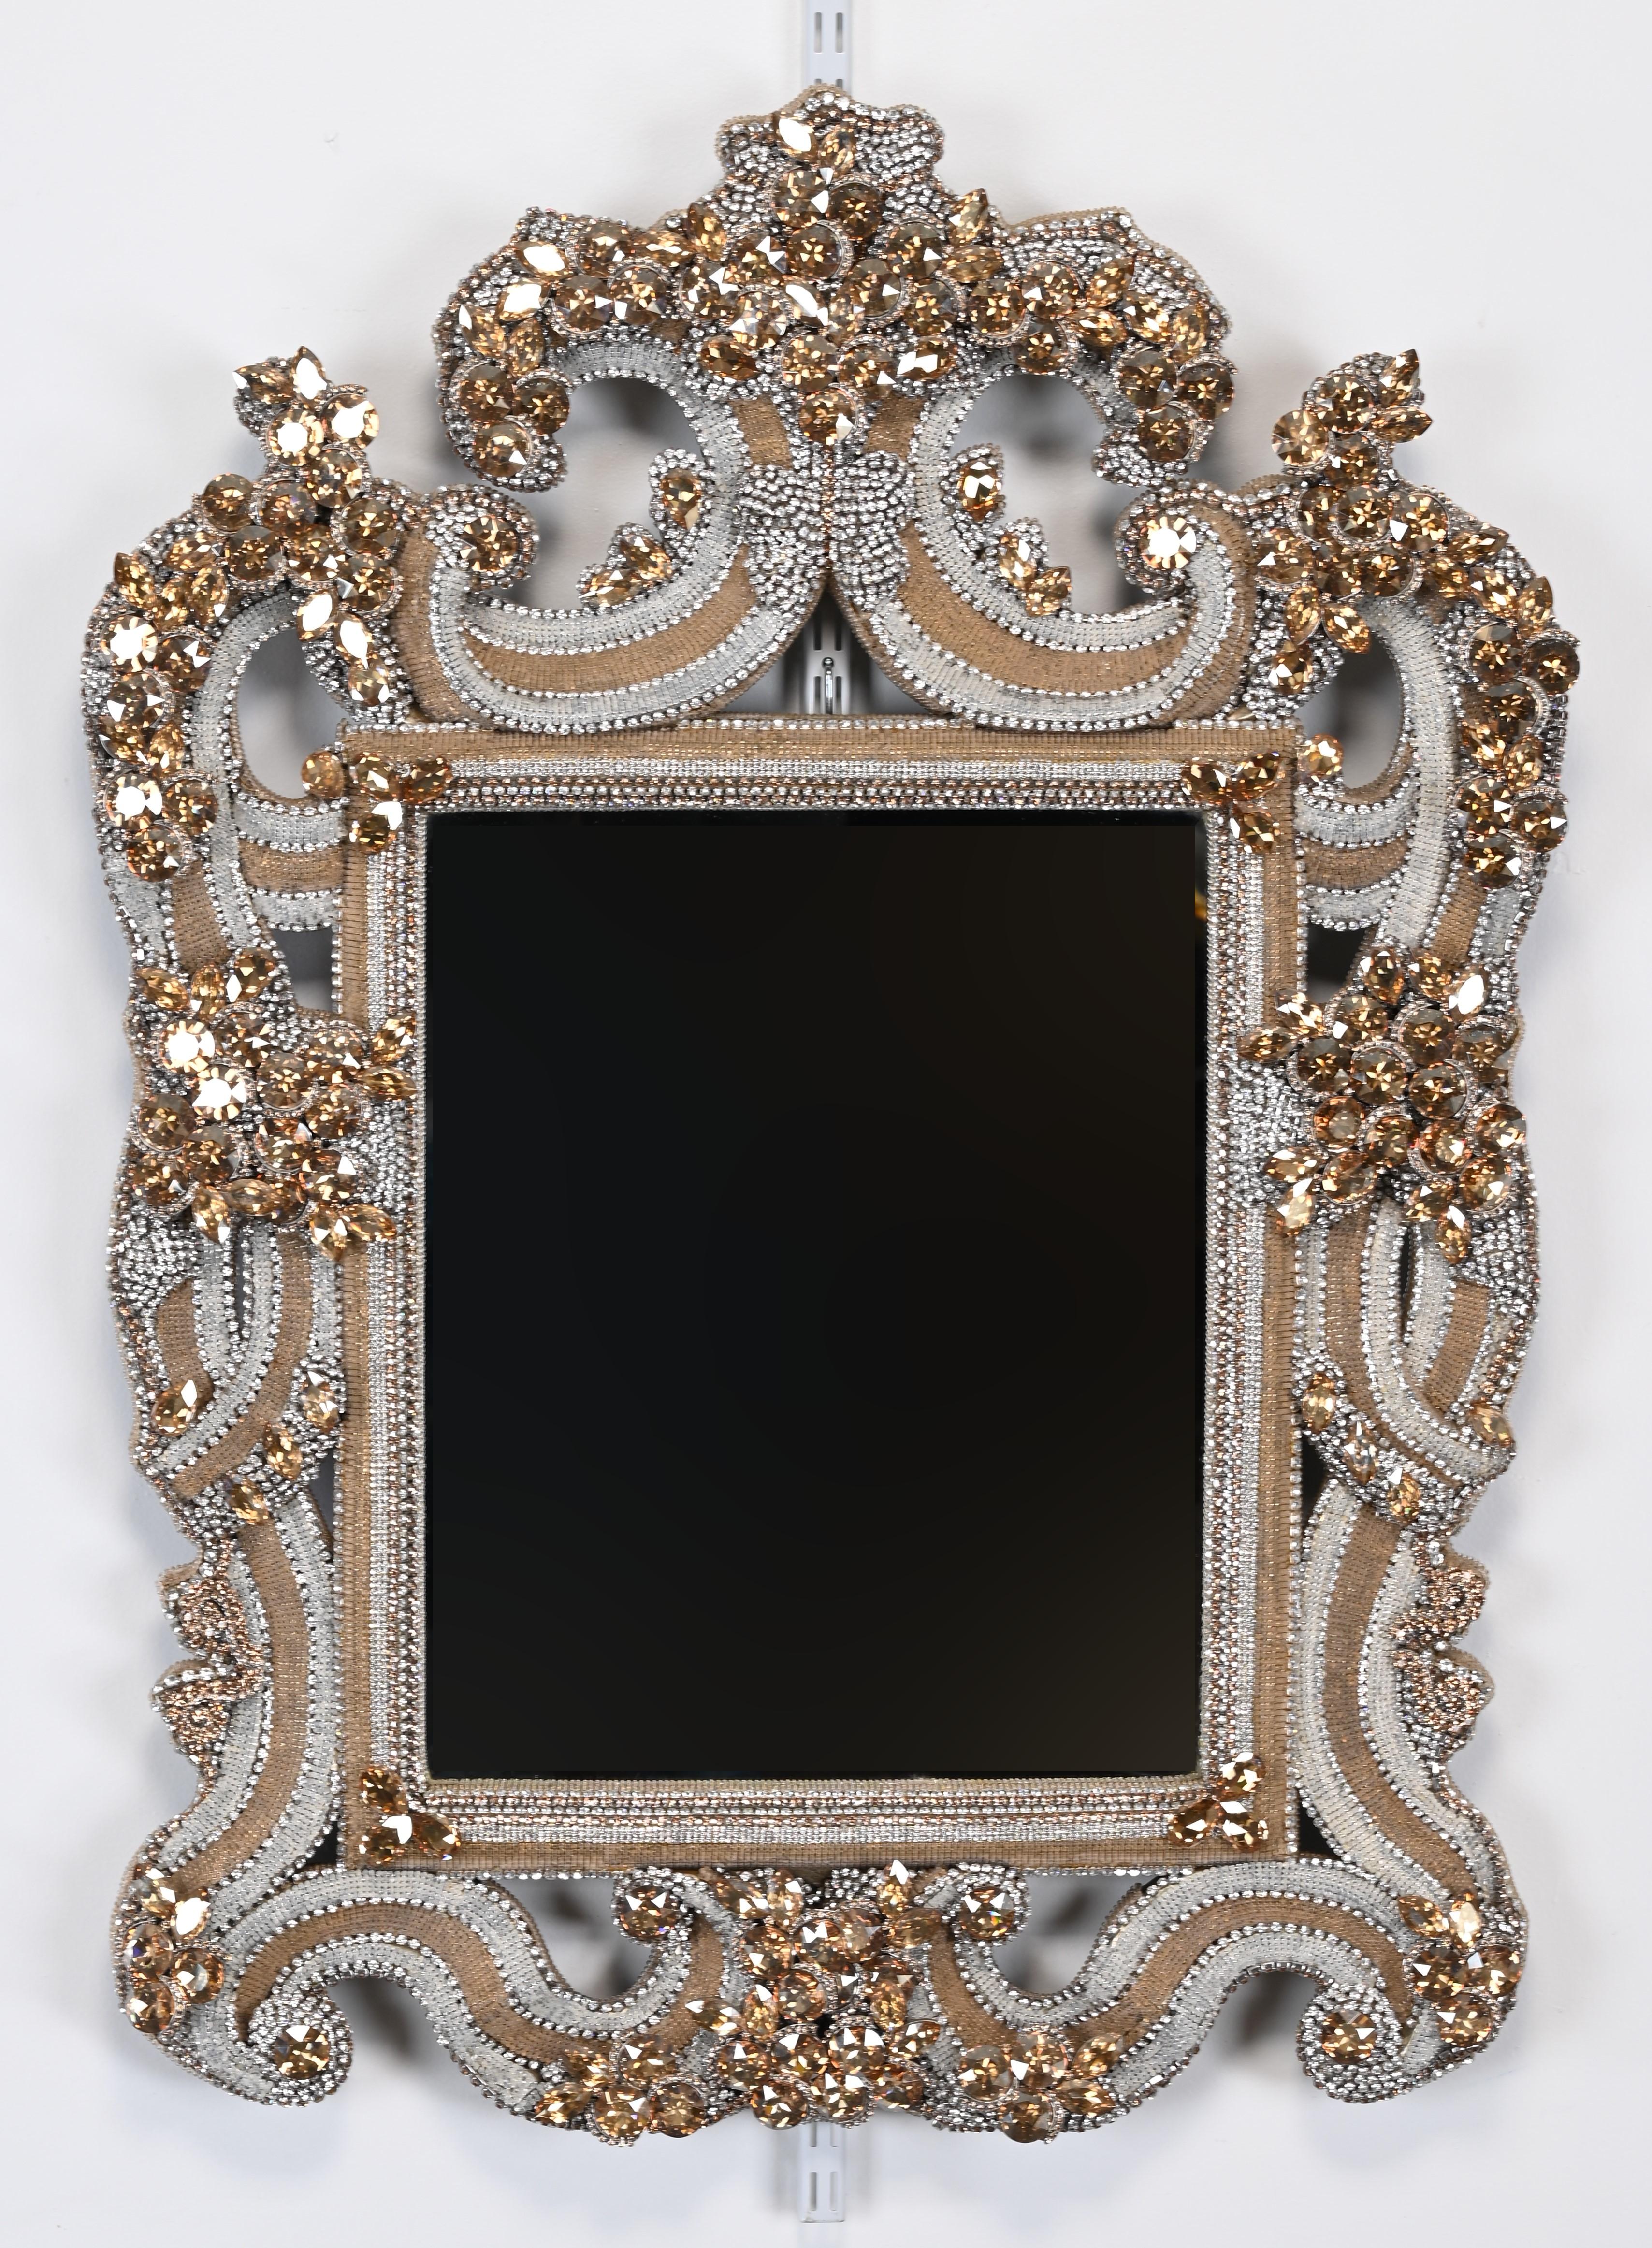 A fabulous Swarovski crystal jeweled mirror with beveled glass. From the B.B. Simon website as follows:

